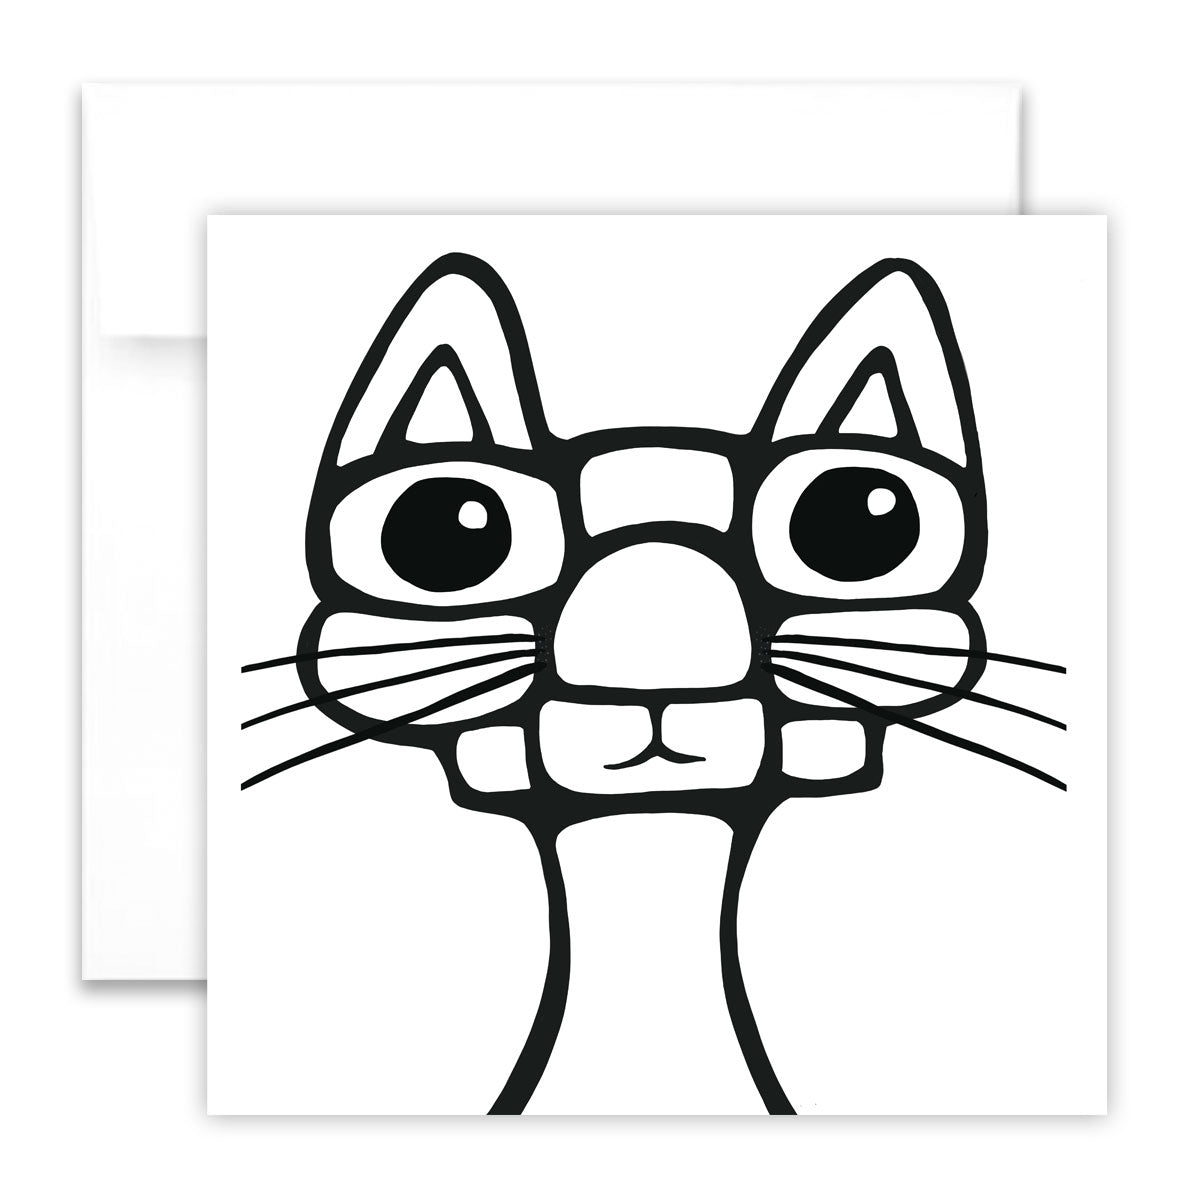 Pack of 5 Greeting Cards - Colouring Cards